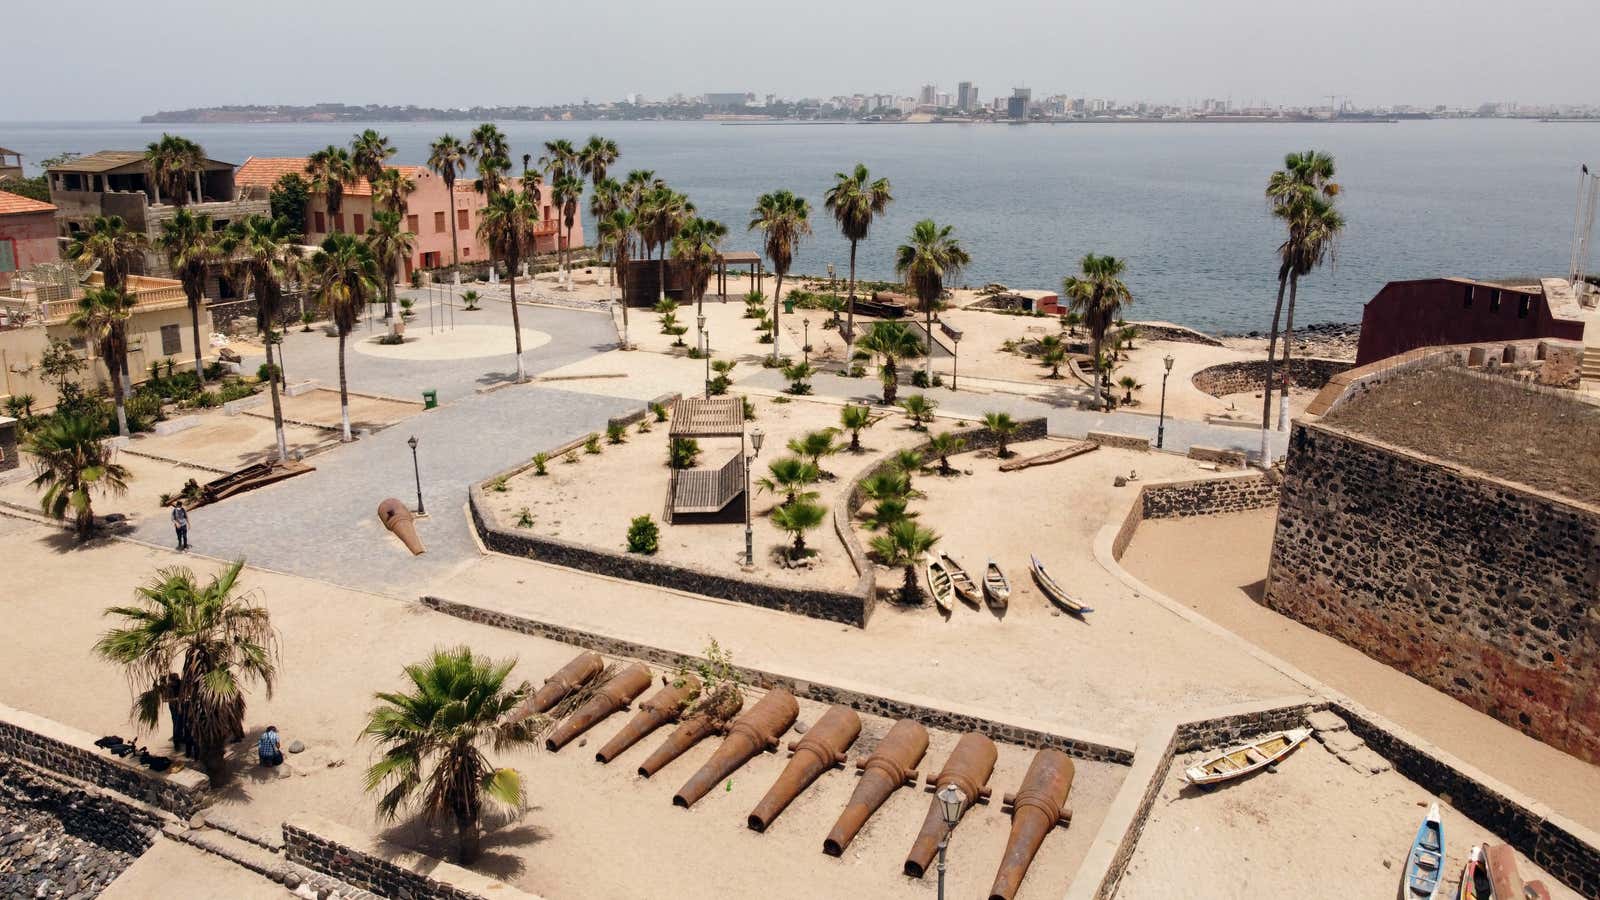 Freedom and Human Dignity Square, previously Europe Square, is pictured off the coast of Dakar. A new podcast aims to make Senegalese history accessible to youth and to preserve the country’s storytelling tradition.